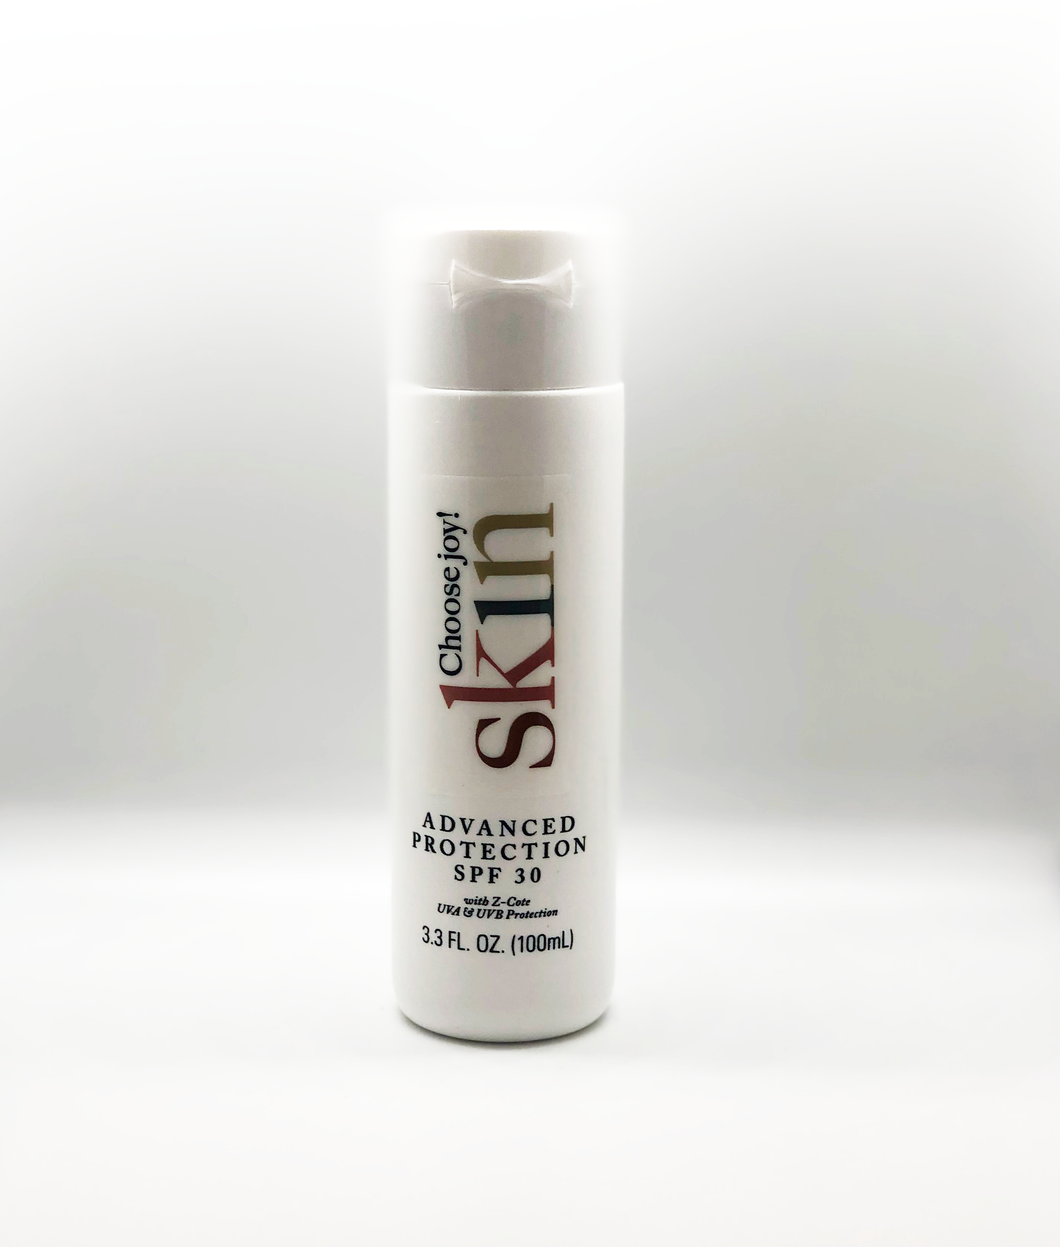 Advanced Protection SPF 30 with Transparent Zinc Oxide